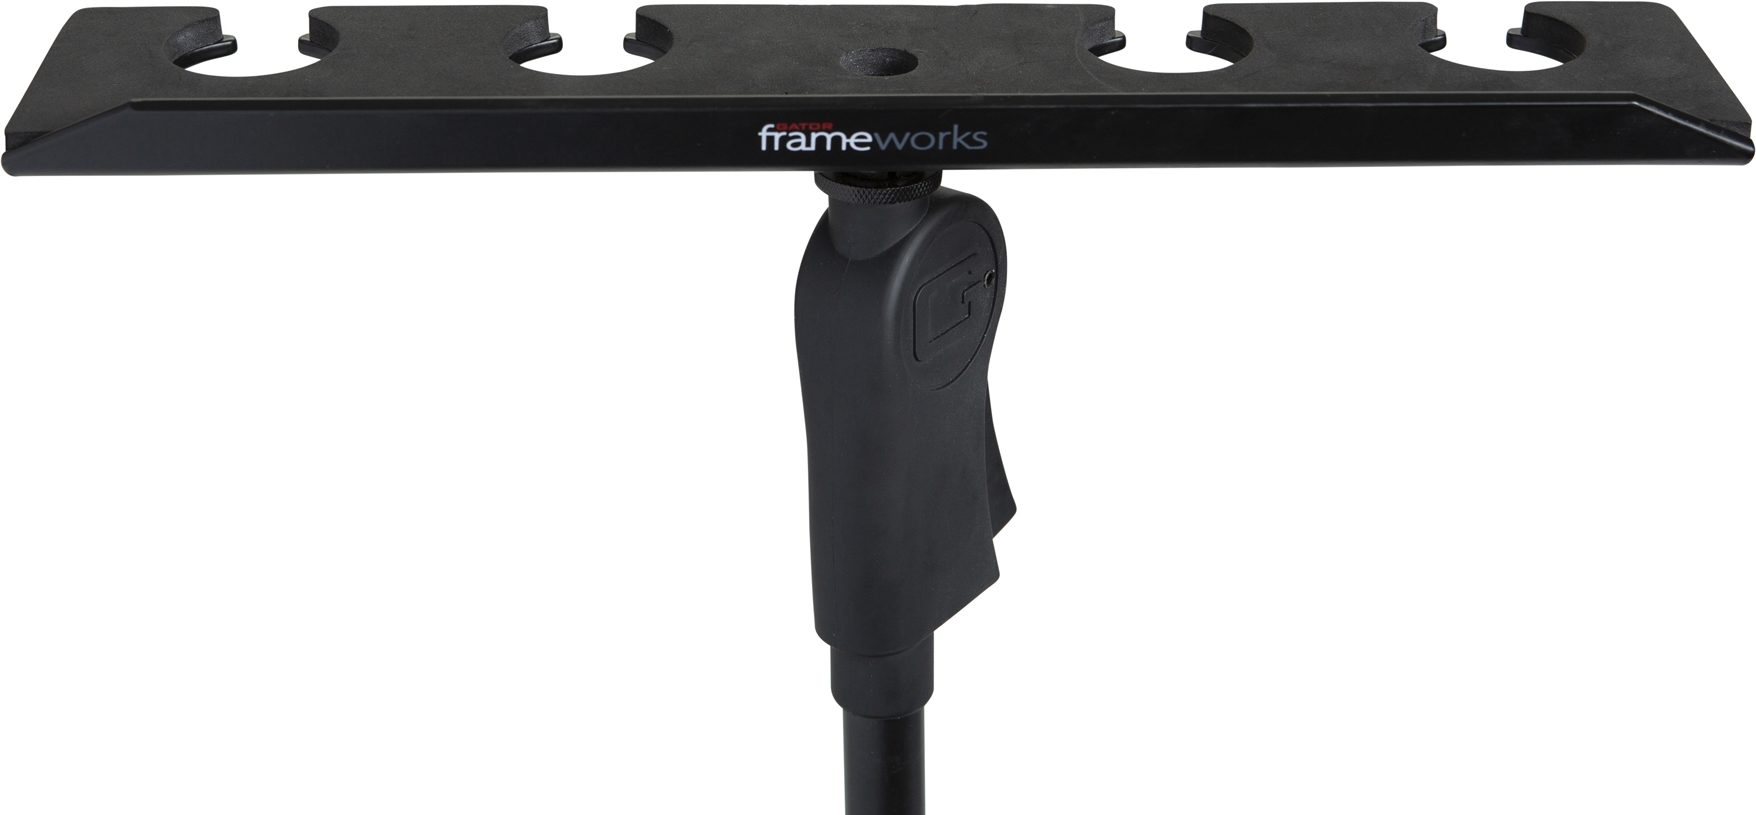 Gator Frameworks GFW-MIC-4TRAY Multi Holder Stand Attachment Holdsup t –  absoluteusa